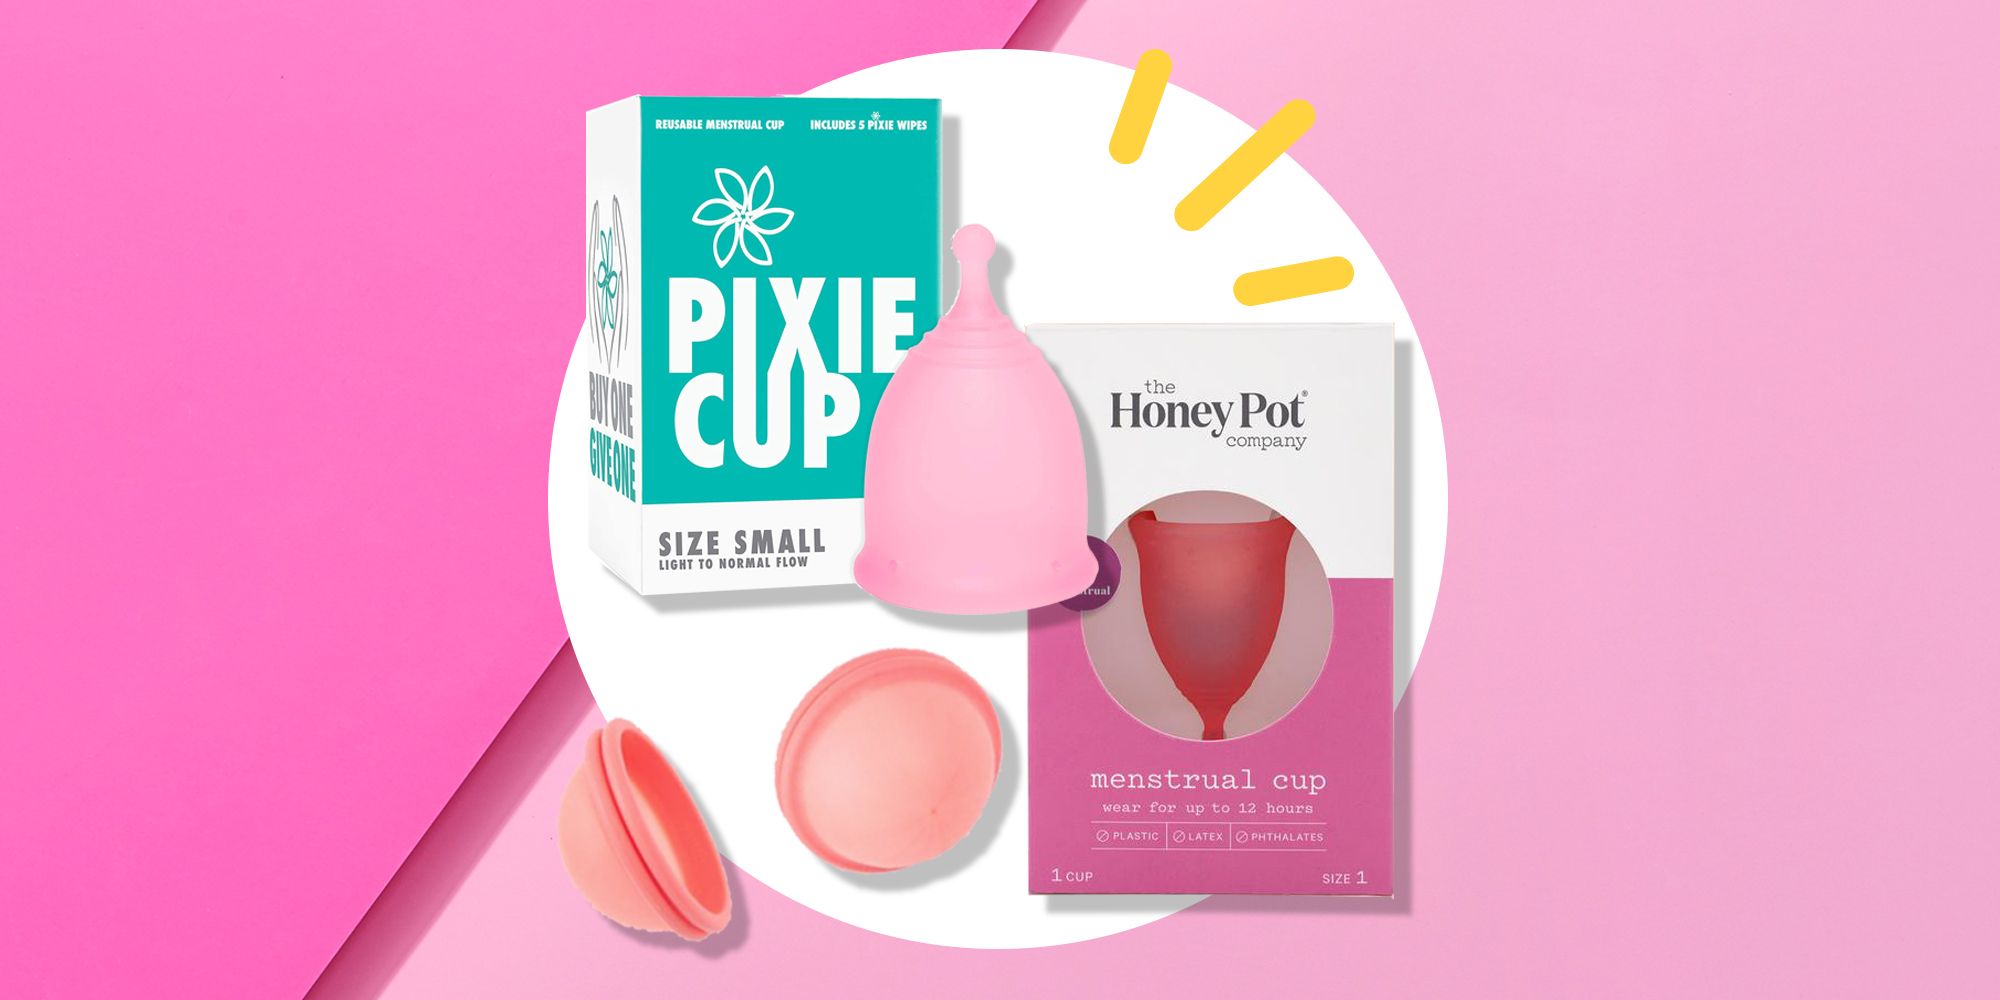 How to wear menstrual cup